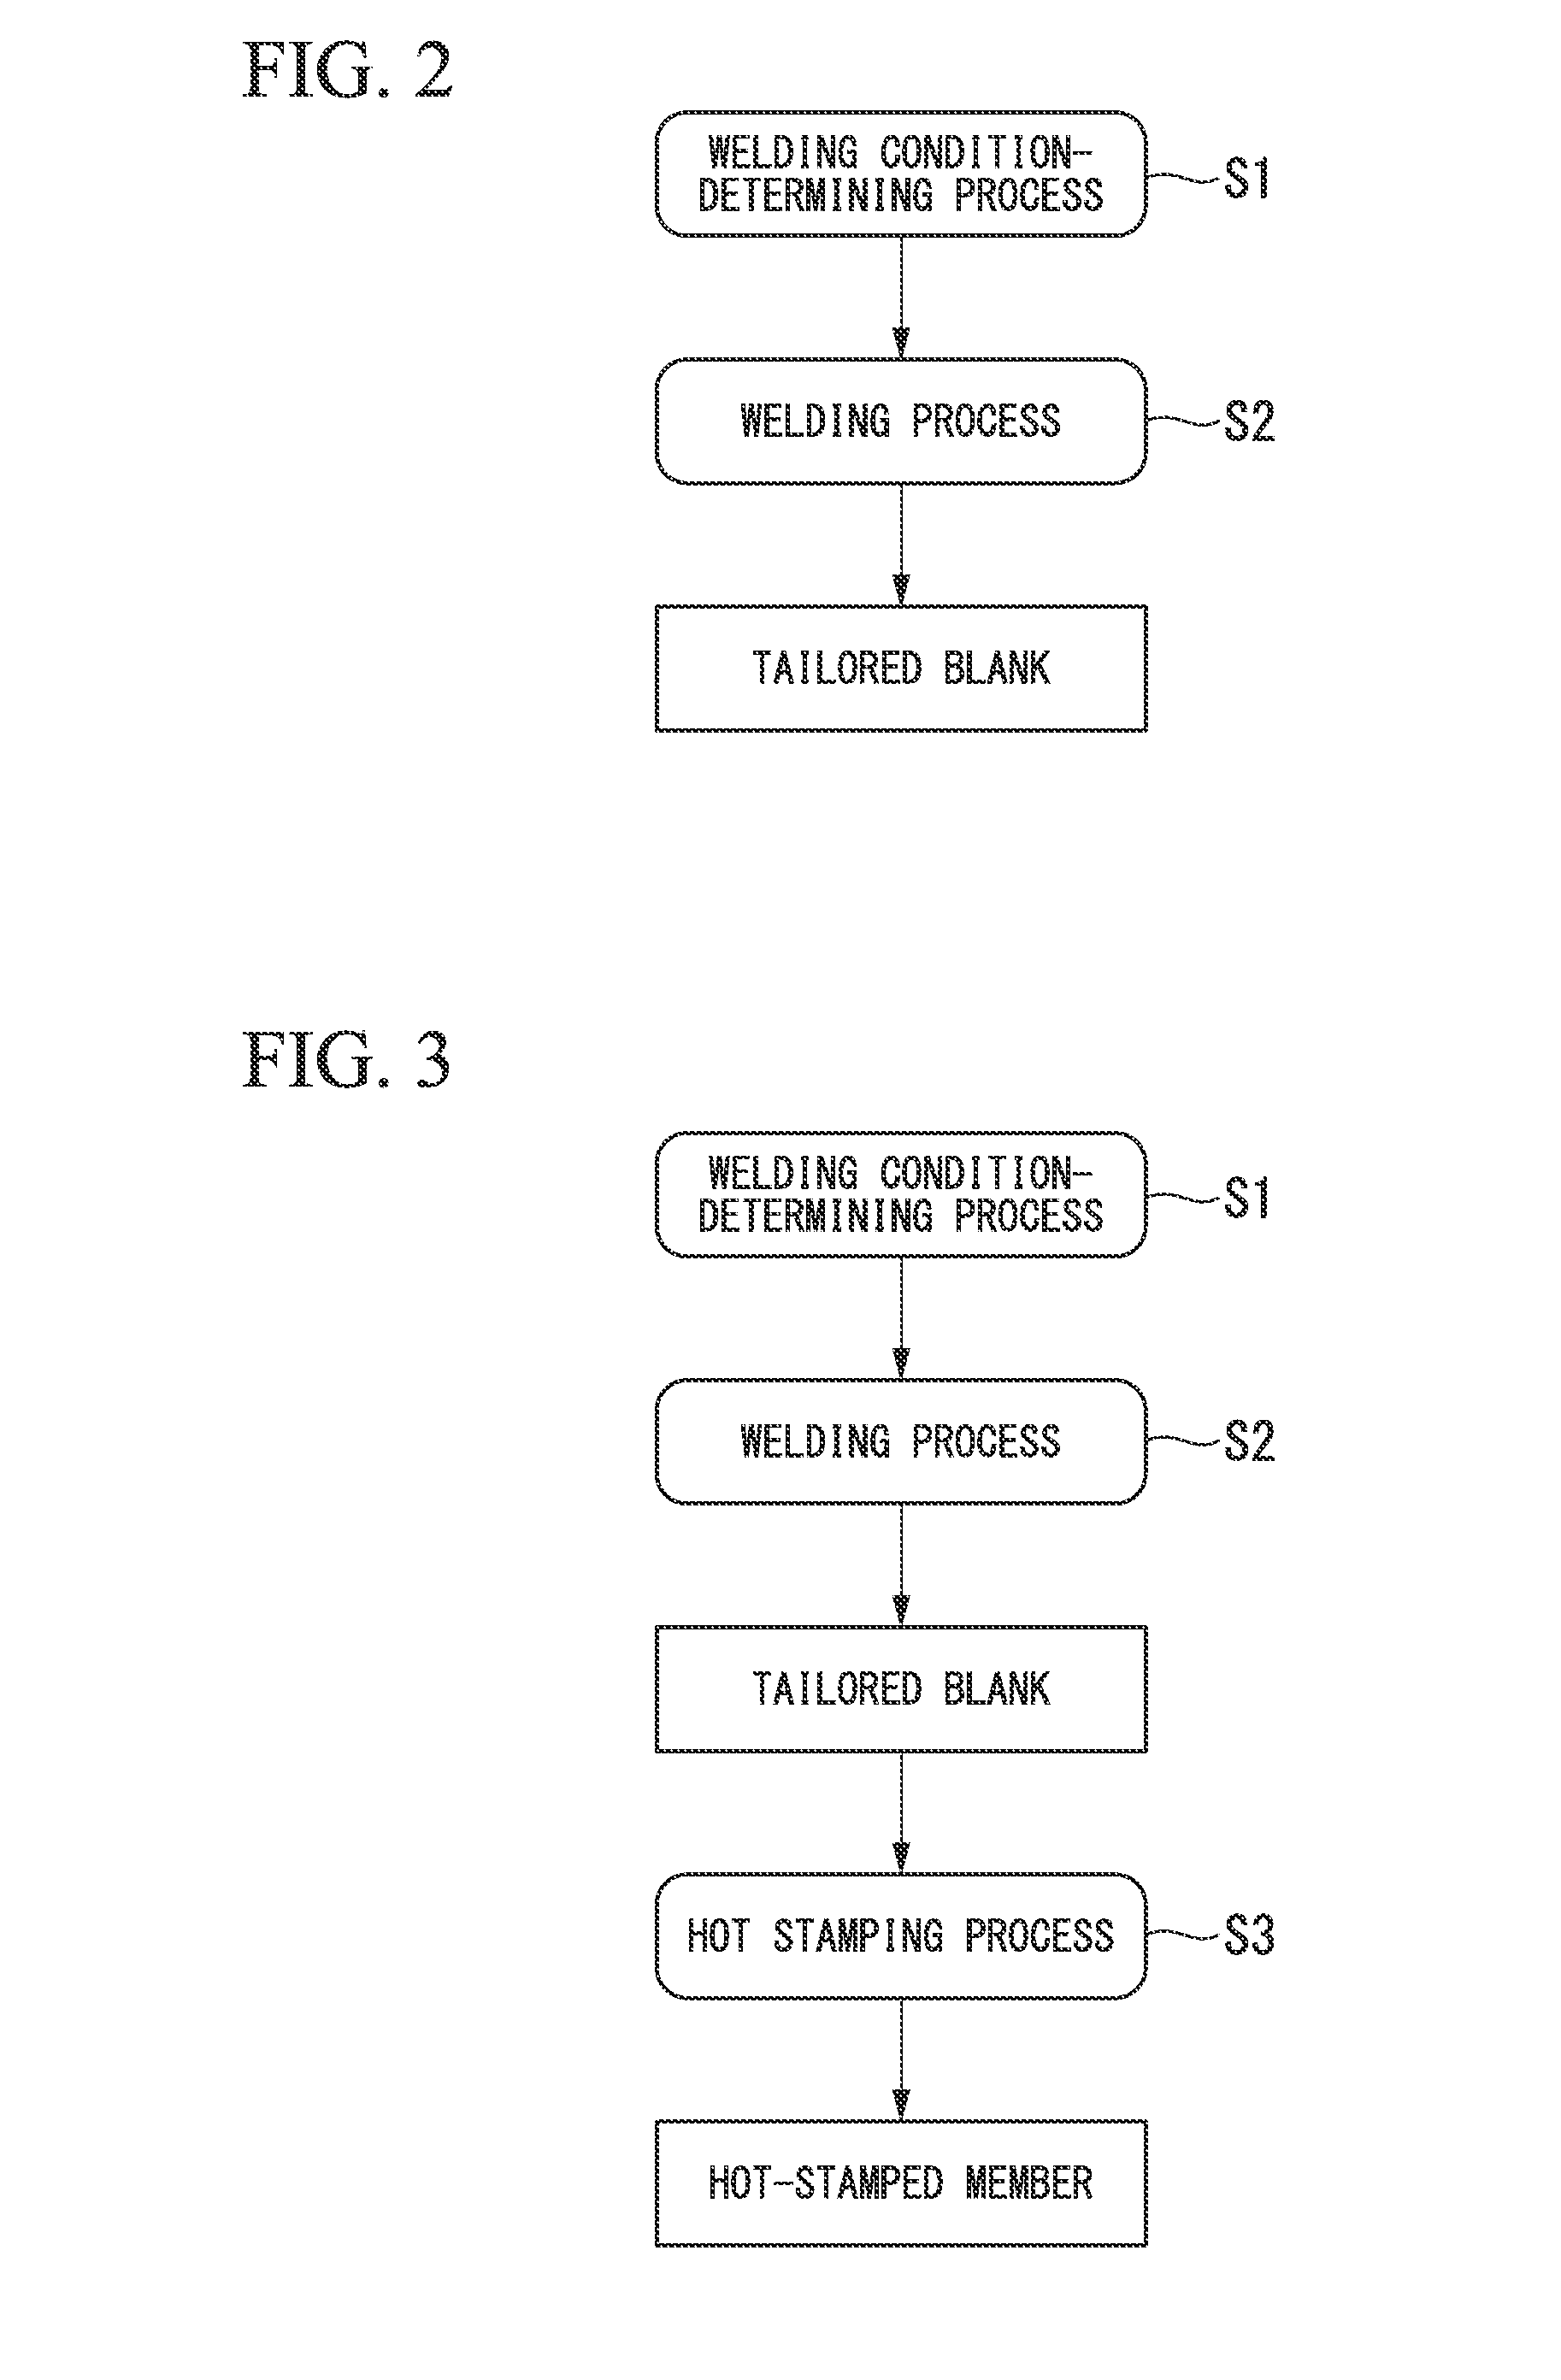 Tailored blank for hot stamping, hot stamped member, and methods for manufacturing same